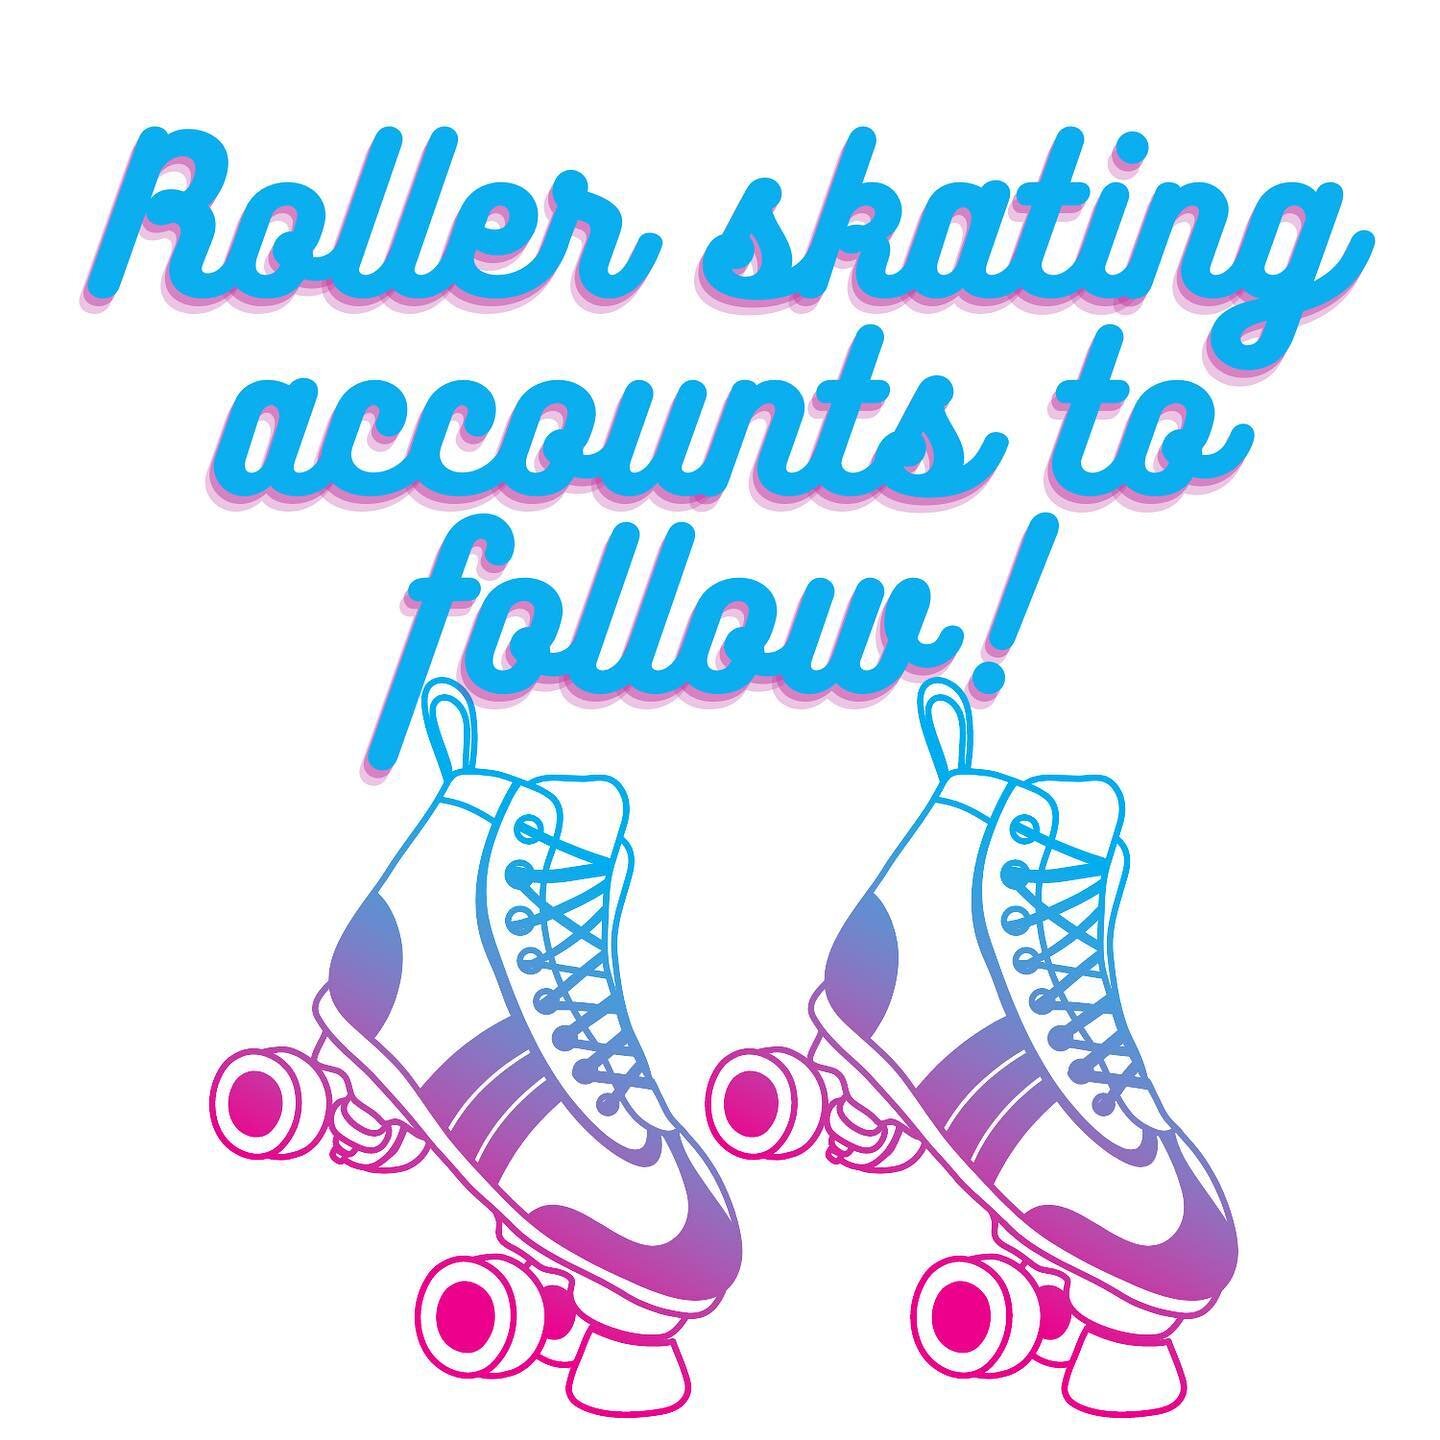 Oooooooh do we love roller skating! If you love it like we do, follow and support these incredible skaters/groups/companies! 🤩💫💖⁣ 🛼
⁣
@justseconds⁣
@lilyskatesalot⁣
@seirasage 
@abominatrix⁣
@gr00vyquads⁣
@fat_girl_has_moxi⁣
@aaliyah913⁣
@the_goo